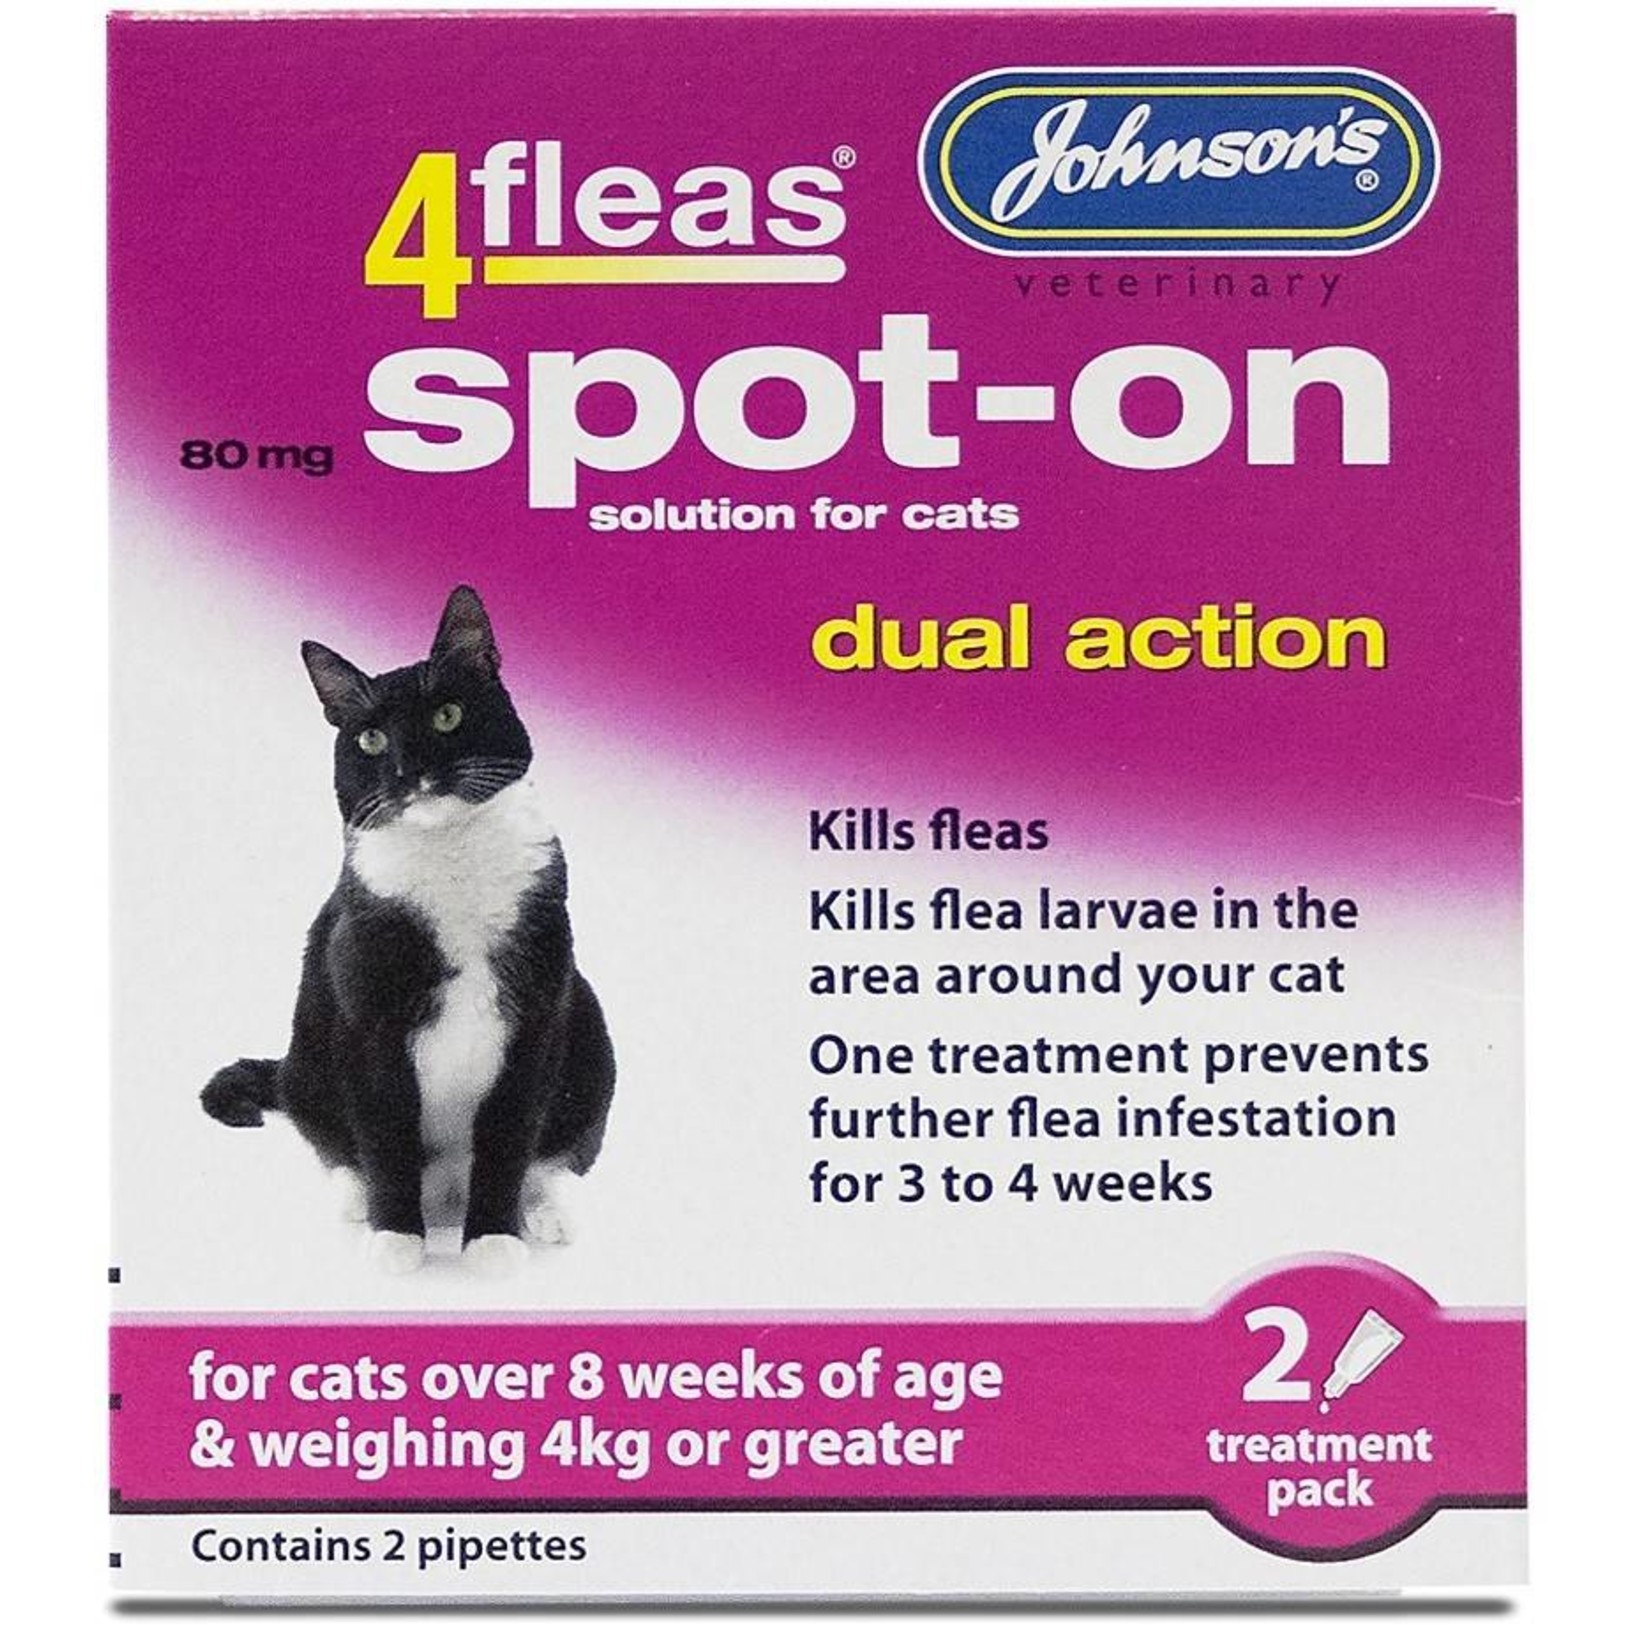 Johnson's Veterinary 4fleas Dual Action Spot-on for Cats over 4kg